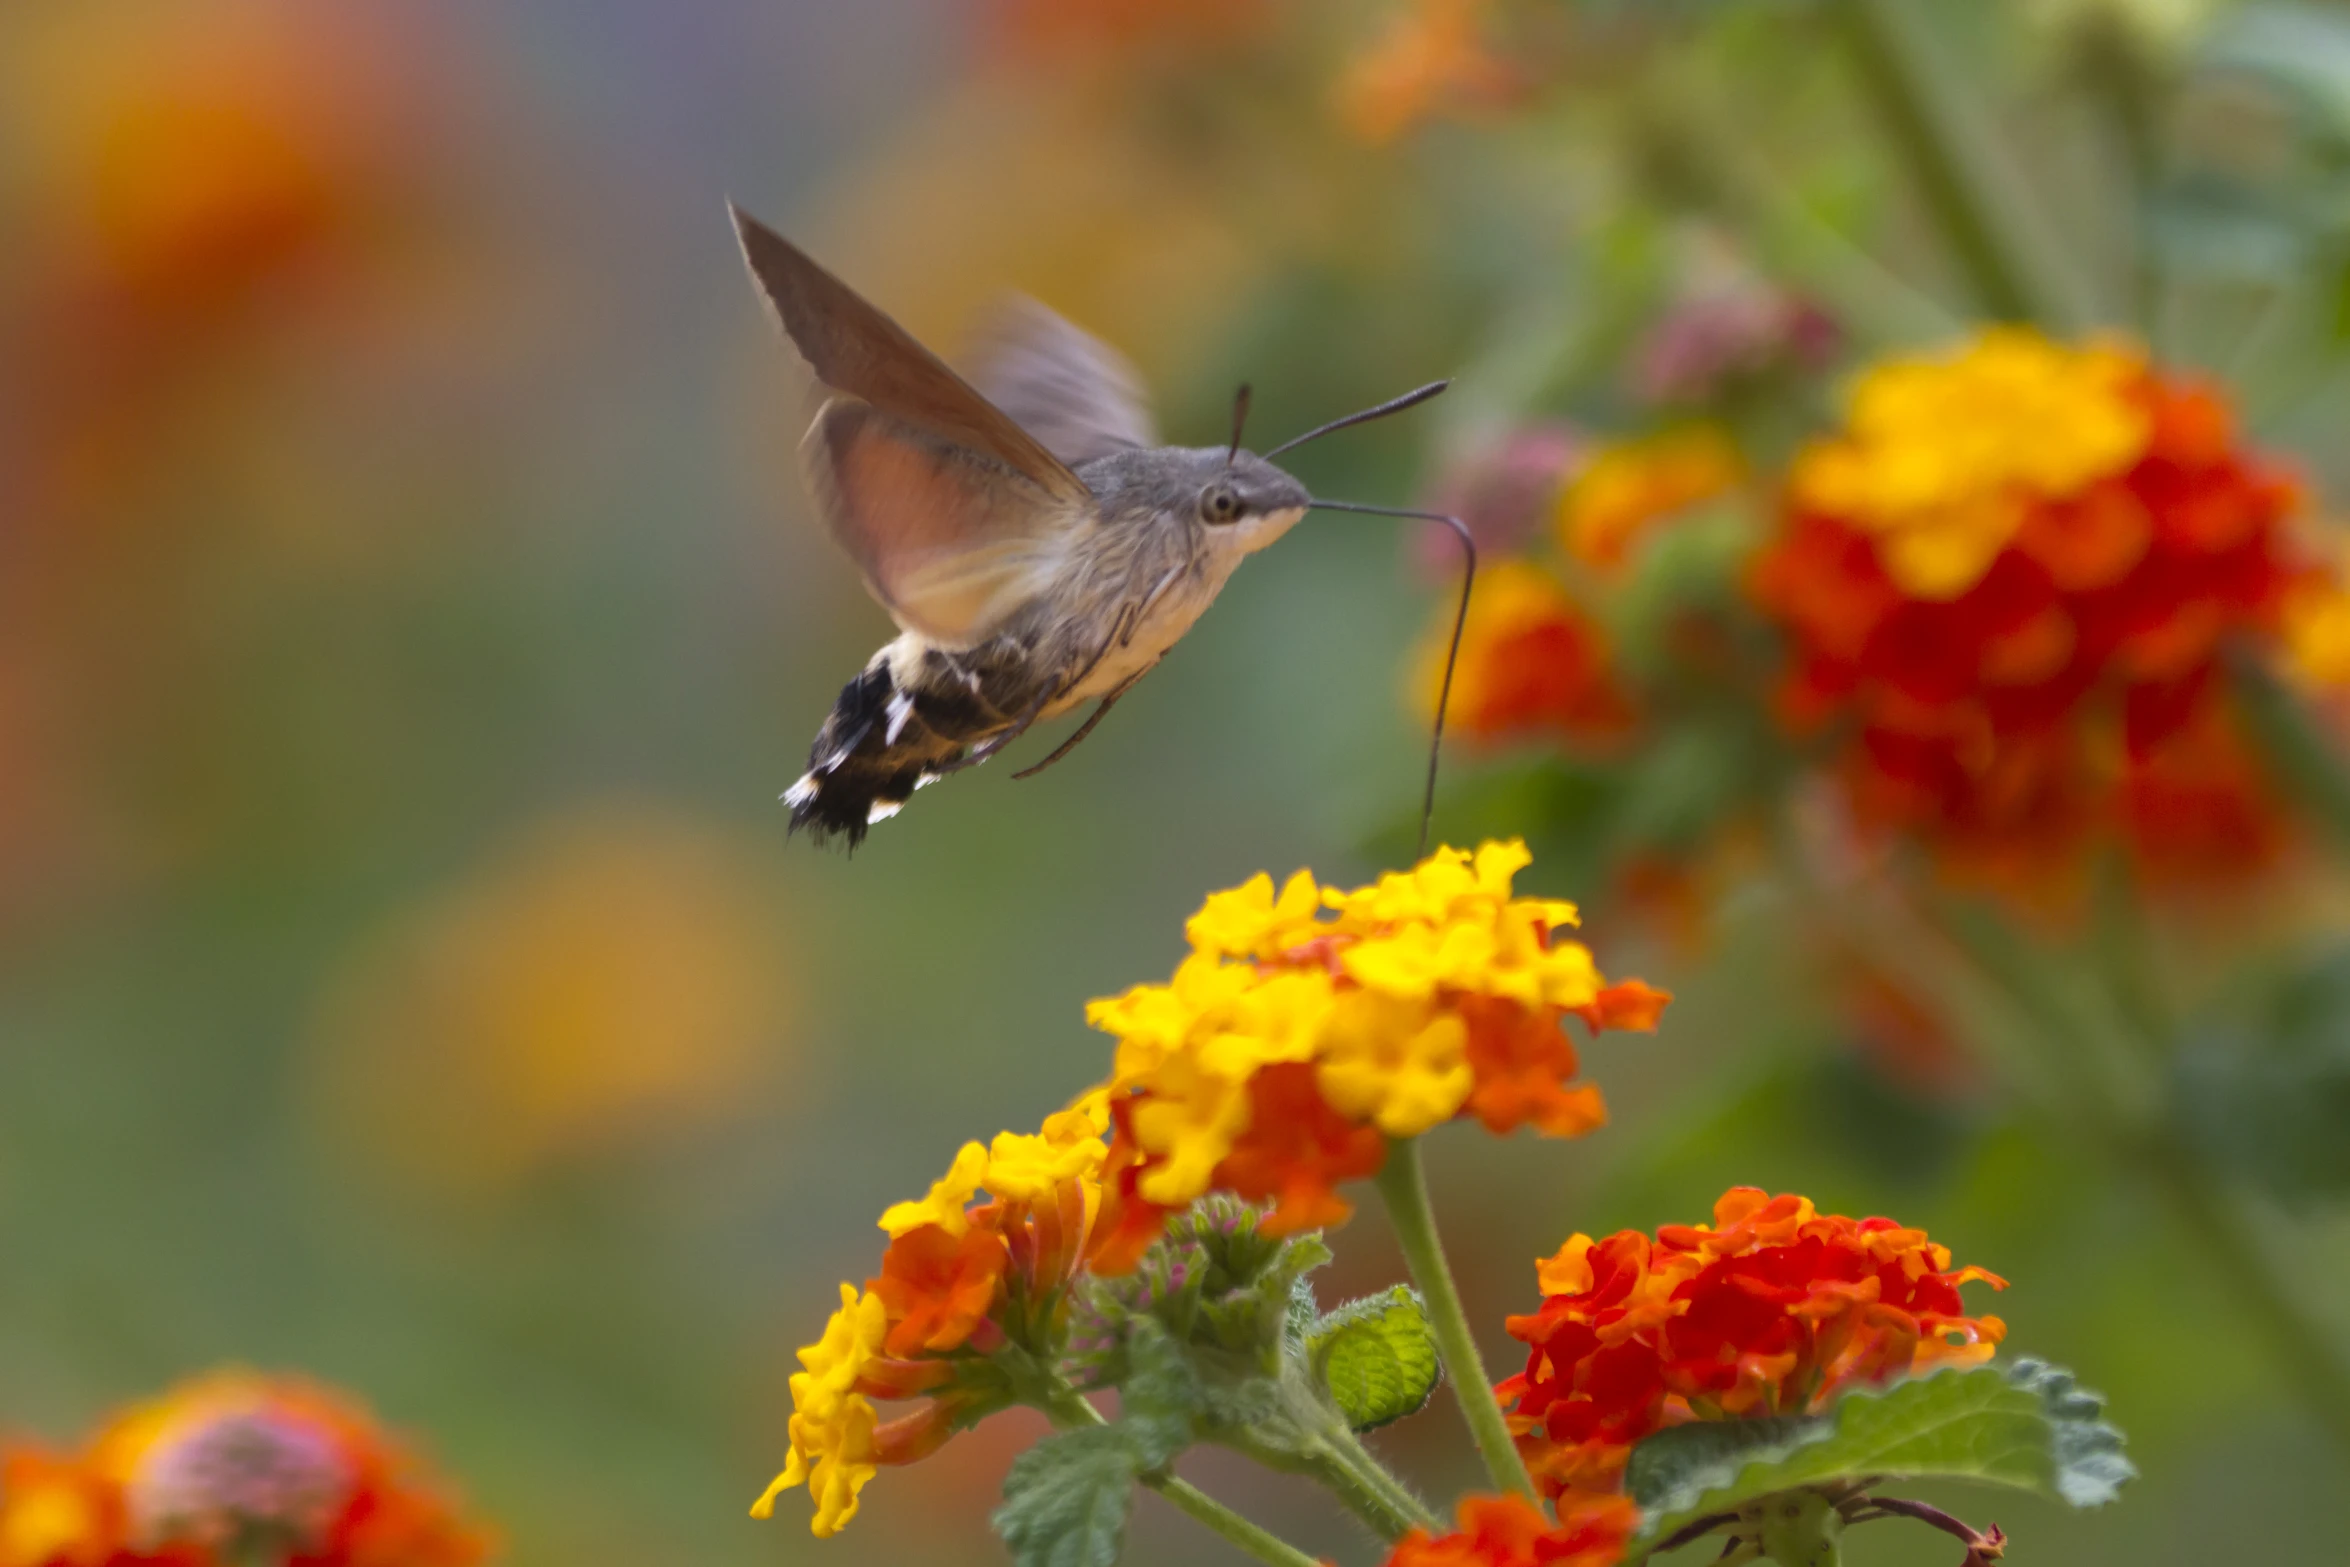 the hummingbird is flying close to flowers